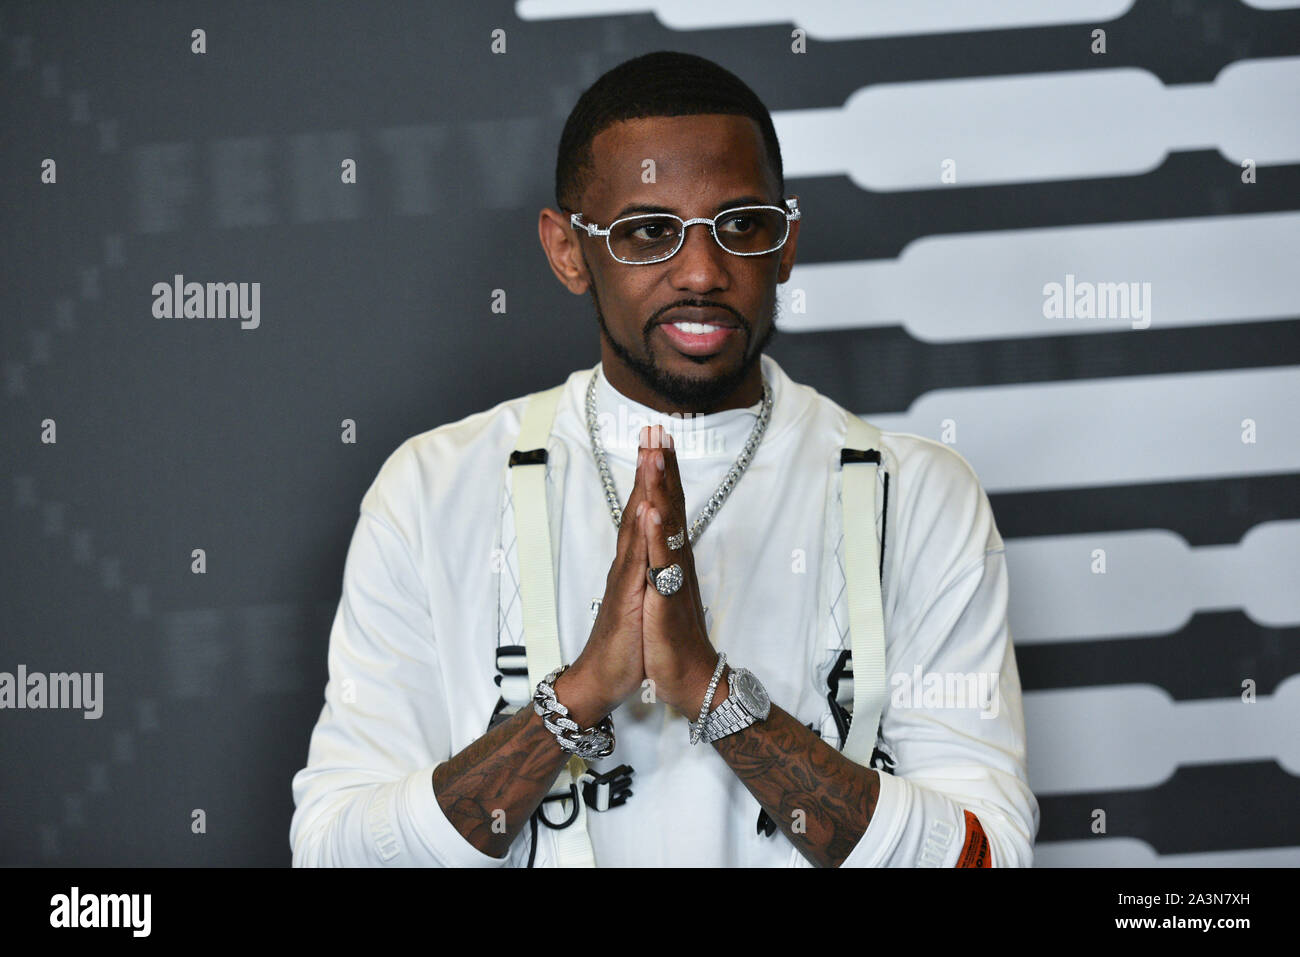 Fabolous attends the Savage x Fenty arrivals during New York Fashion Week at Barclays Center on September 10, 2019 in New York City. Stock Photo